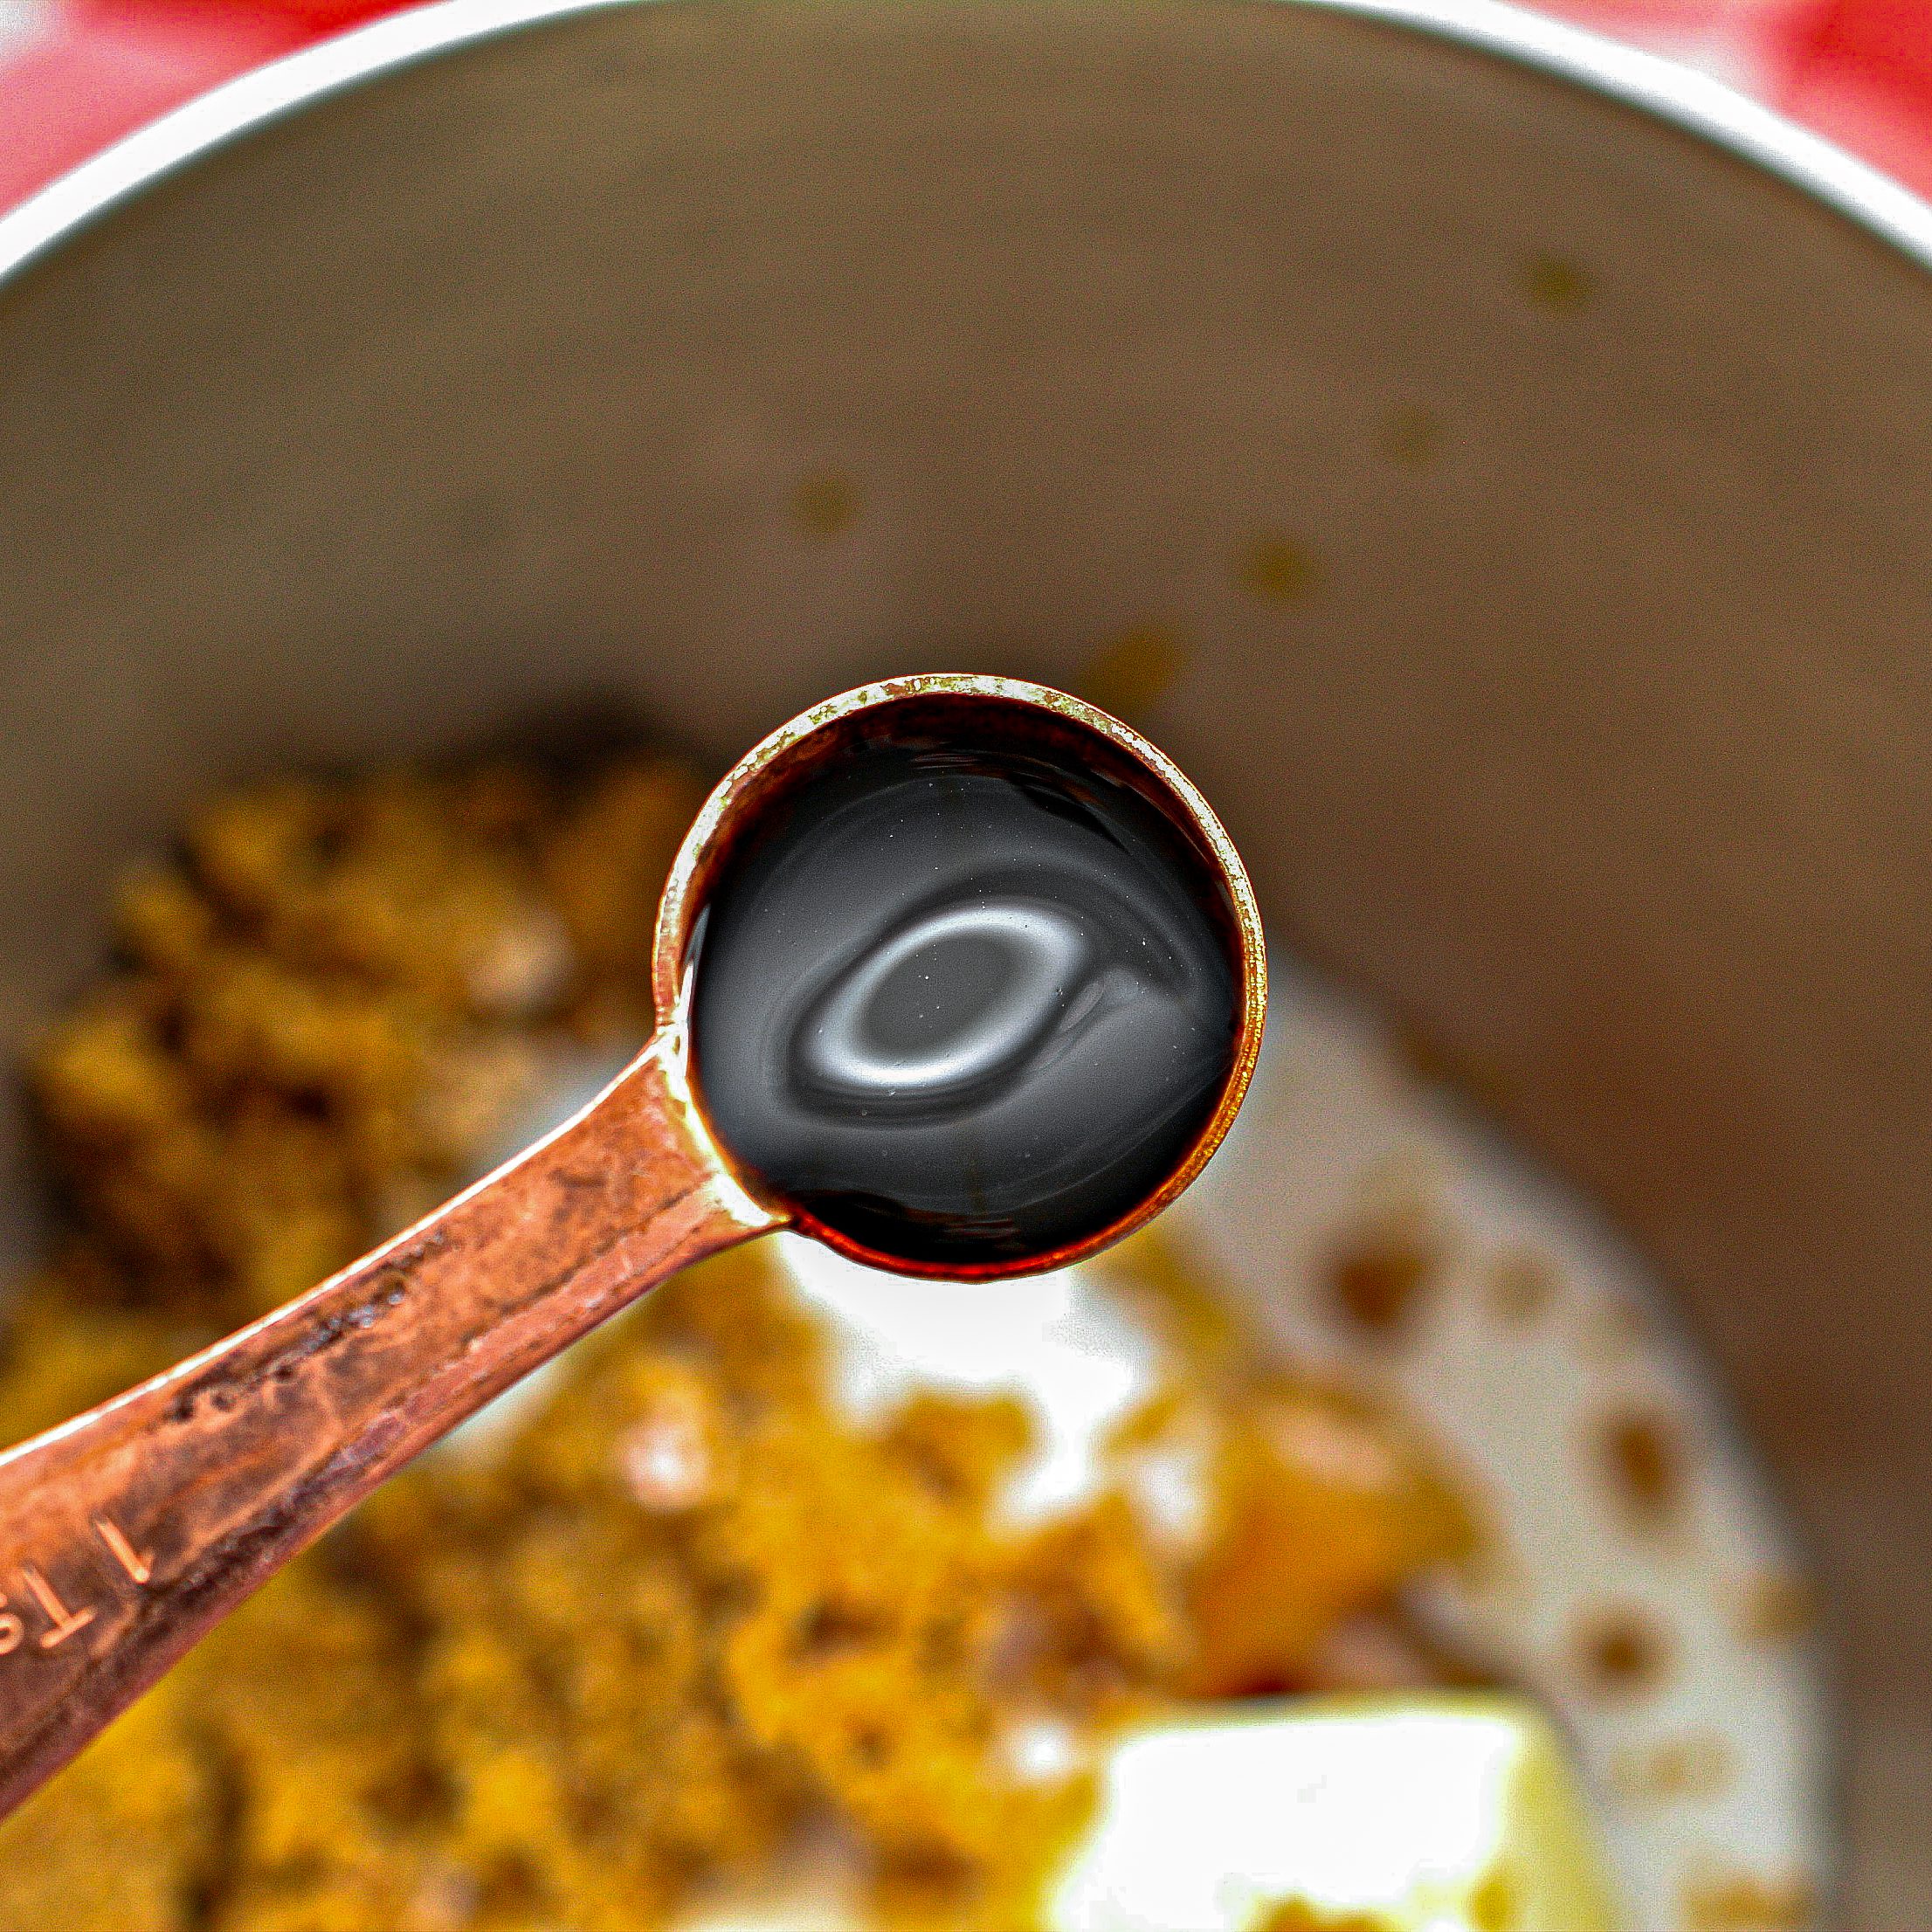 Add the sweet potato, butter, granulated sugar, brown sugar, and vanilla to a mixing bowl and beat on high until smooth.